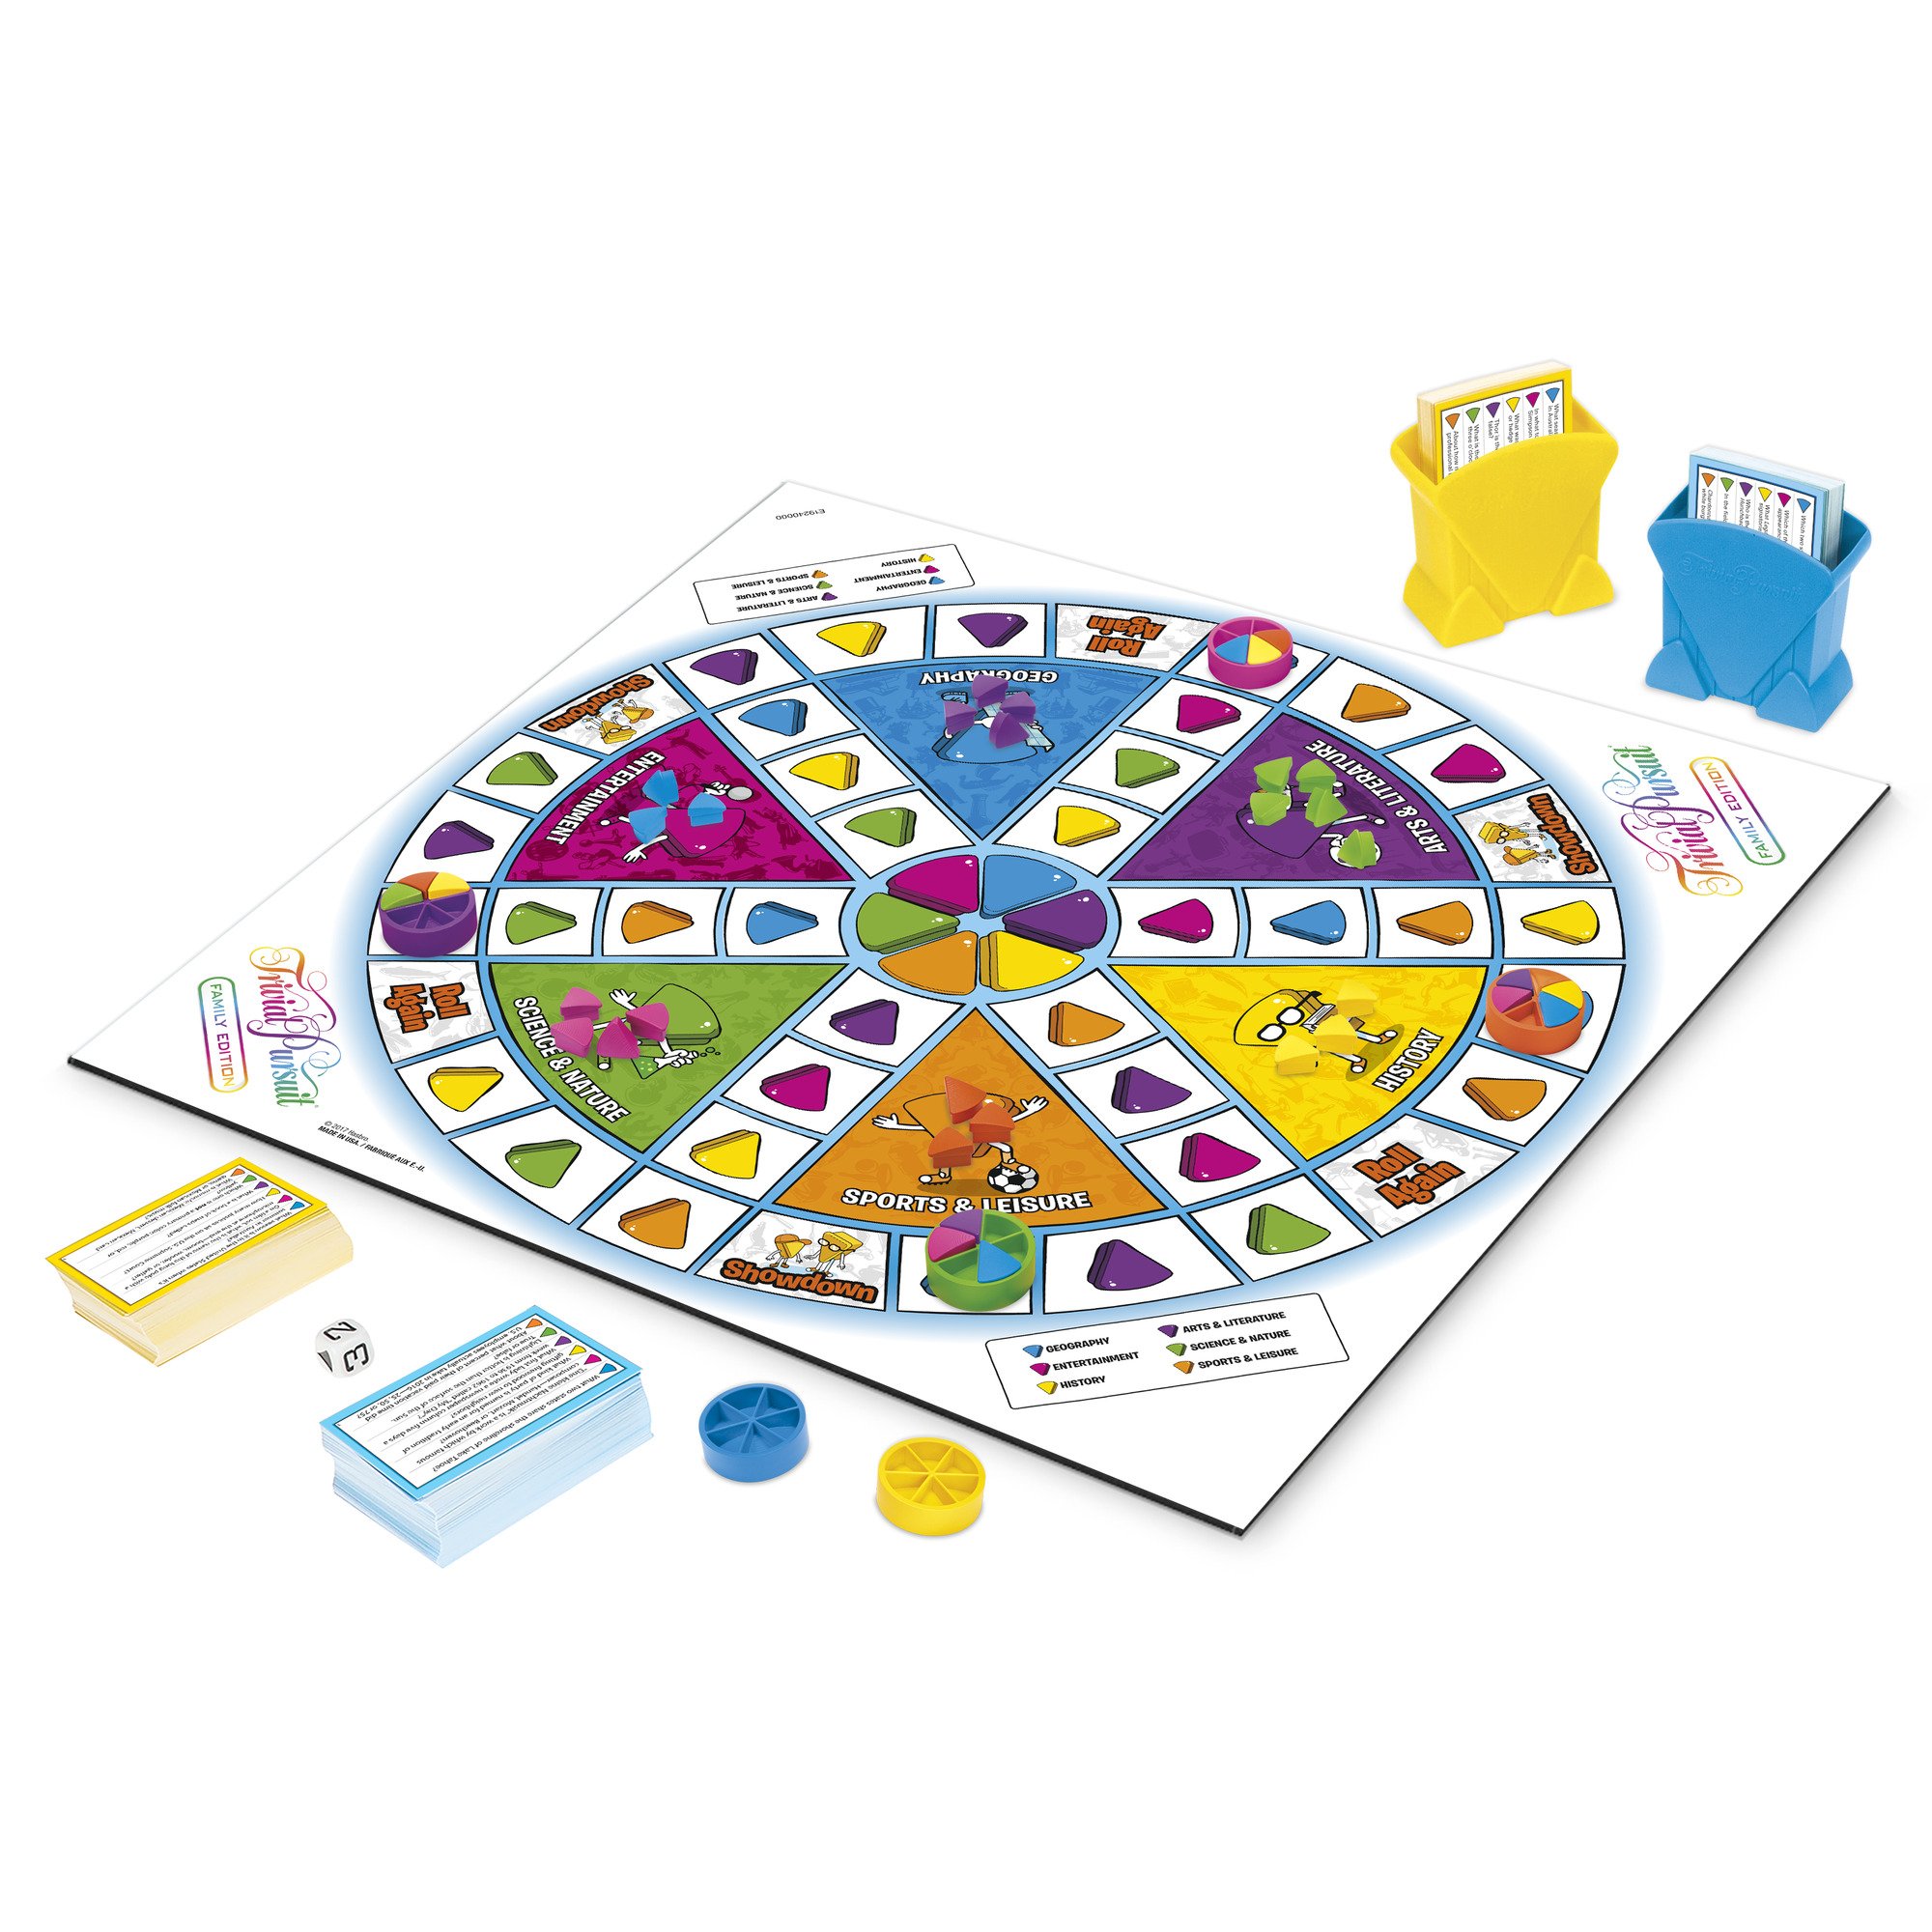 Hasbro Gaming Trivial Pursuit Family Edition